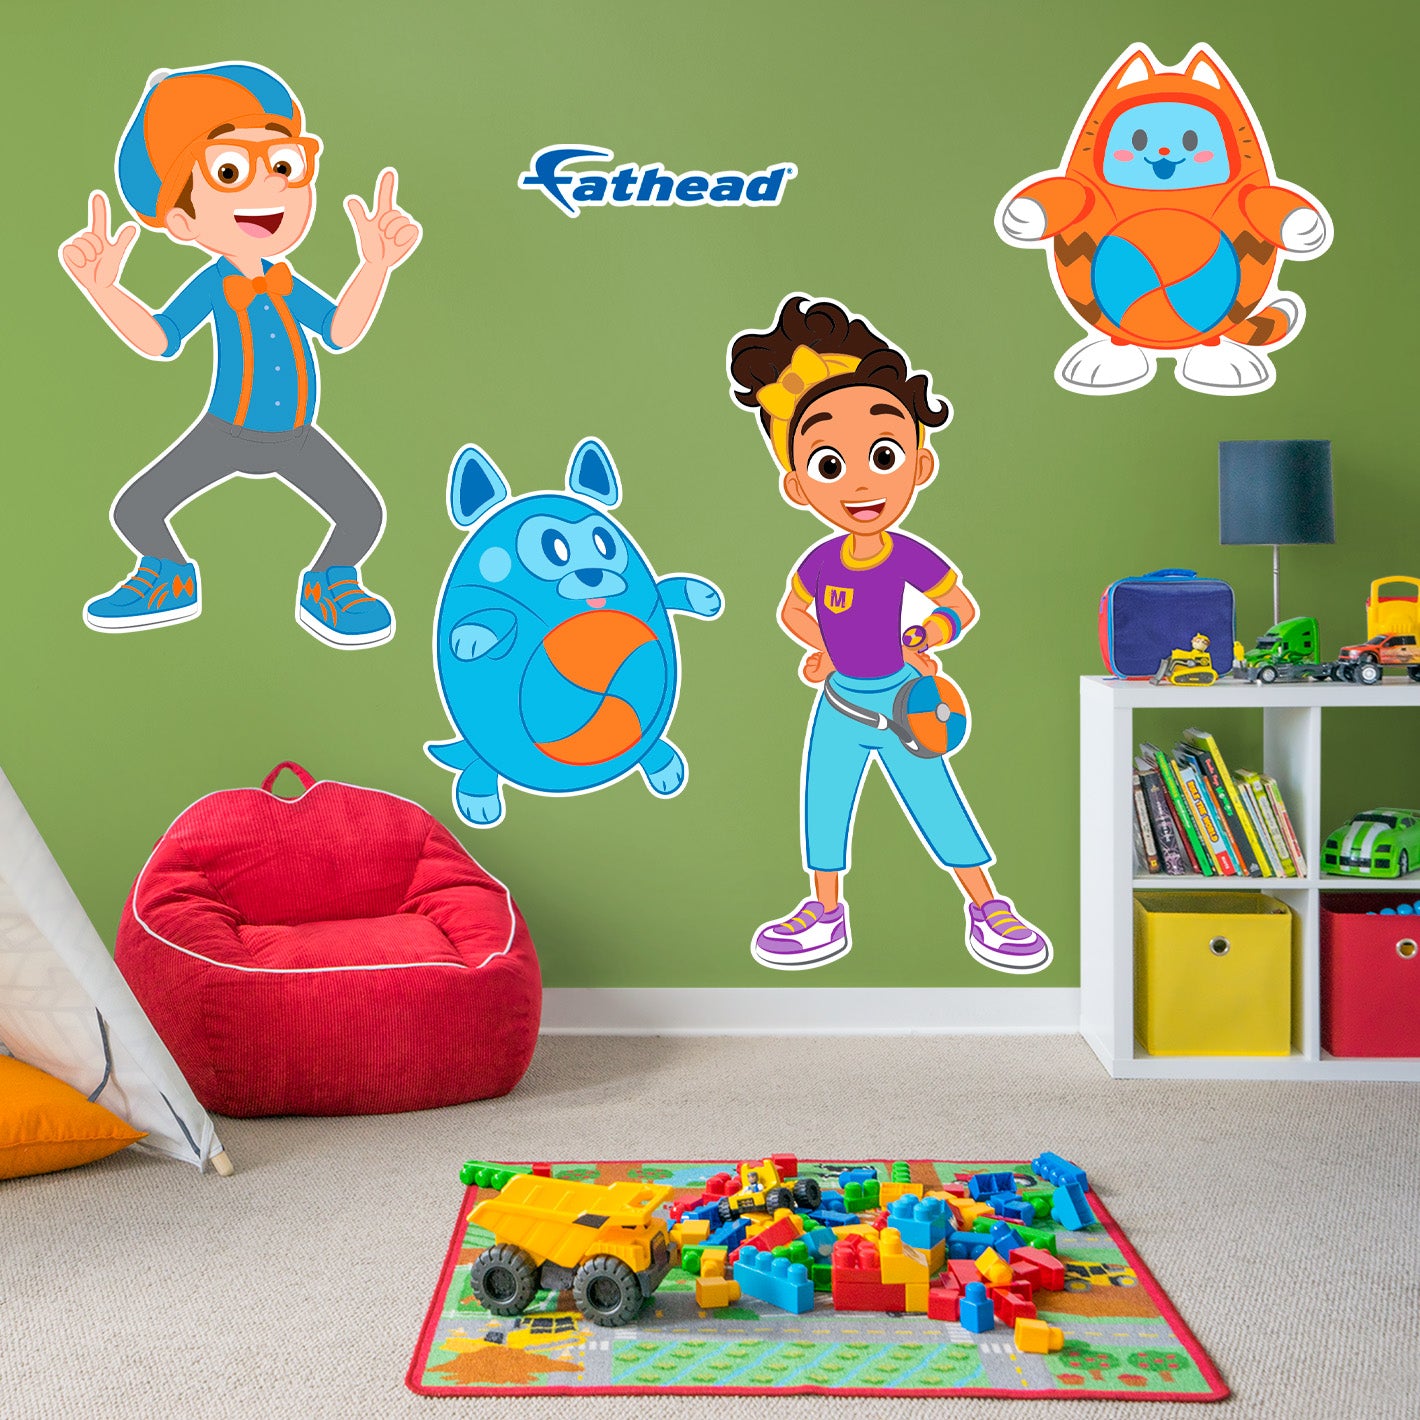 Blippi Character Collection        - Officially Licensed Blippi Removable     Adhesive Decal